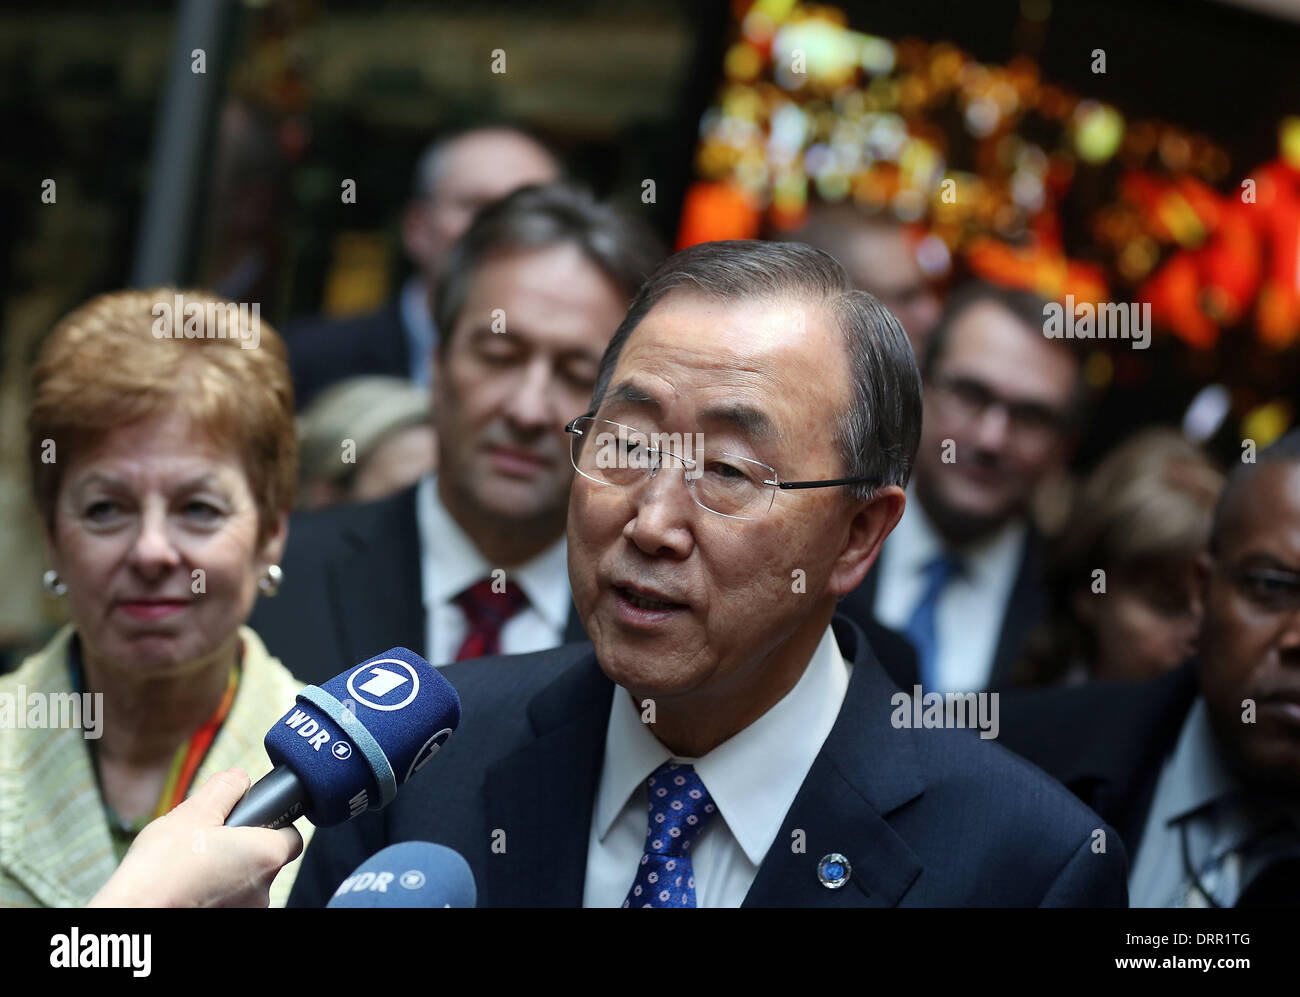 Bonn, Germany. 31st Jan, 2014. UN Secretary General Ban Ki Moon (C), his wife Ban Soon-taek (R) next to NRW Minister for Federal Affairs Ursula Schwall-Dueren (L) speaks to the press in the Haus der Geschichte in Bonn, Germany, 31 January 2014. Ban Ki Moon learned about the work of the UN organizations at their Bonn offices. Photo: OLIVER BERG/dpa/Alamy Live News Stock Photo